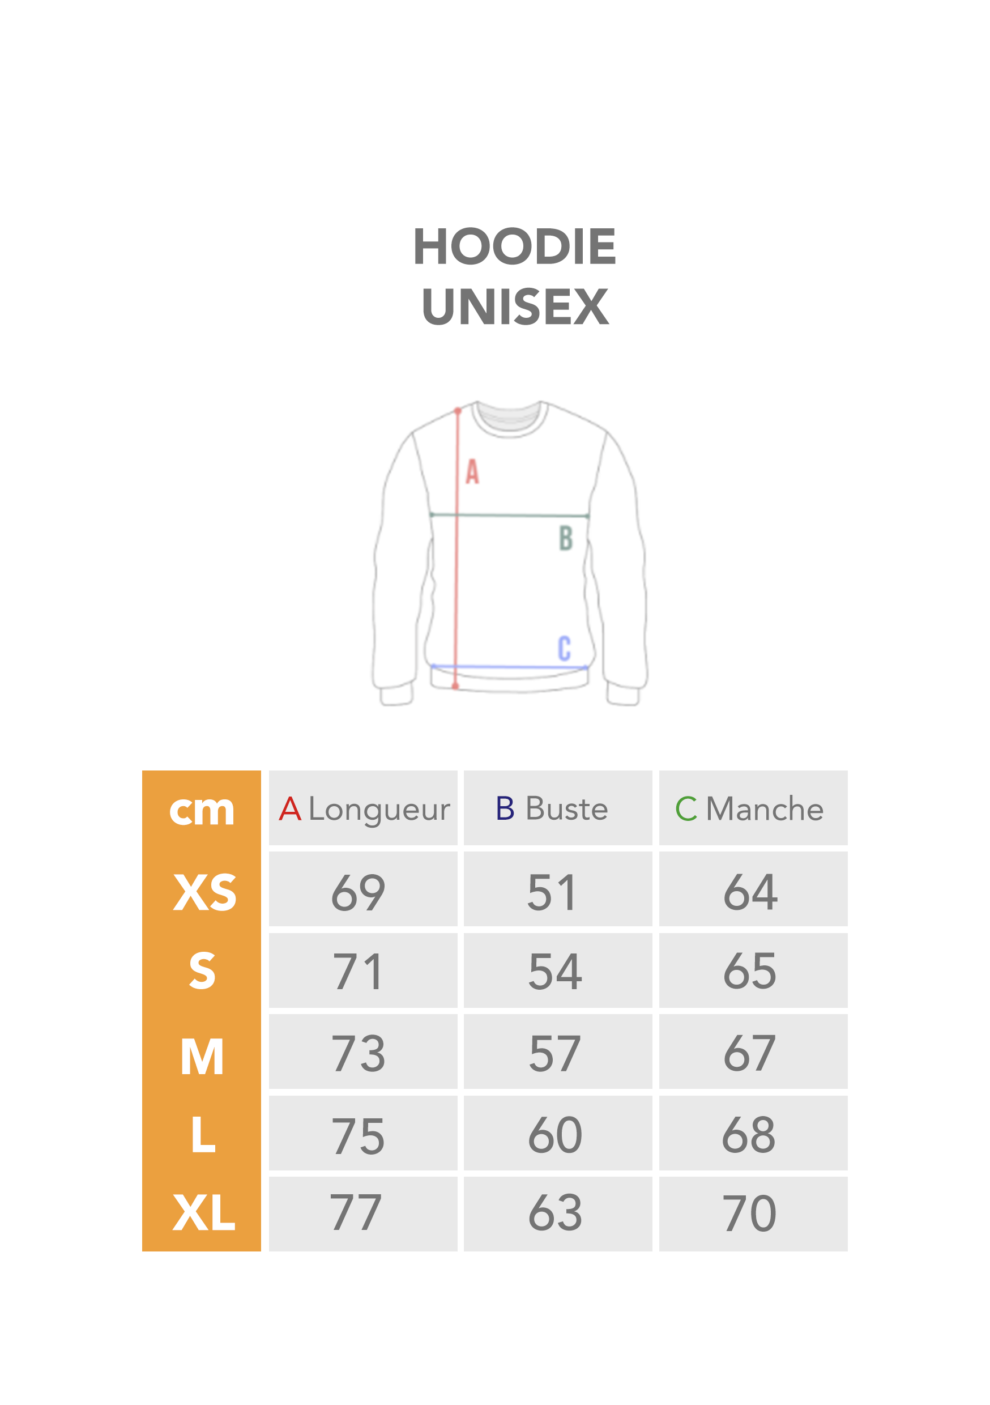 Guide des tailles - Hoodie